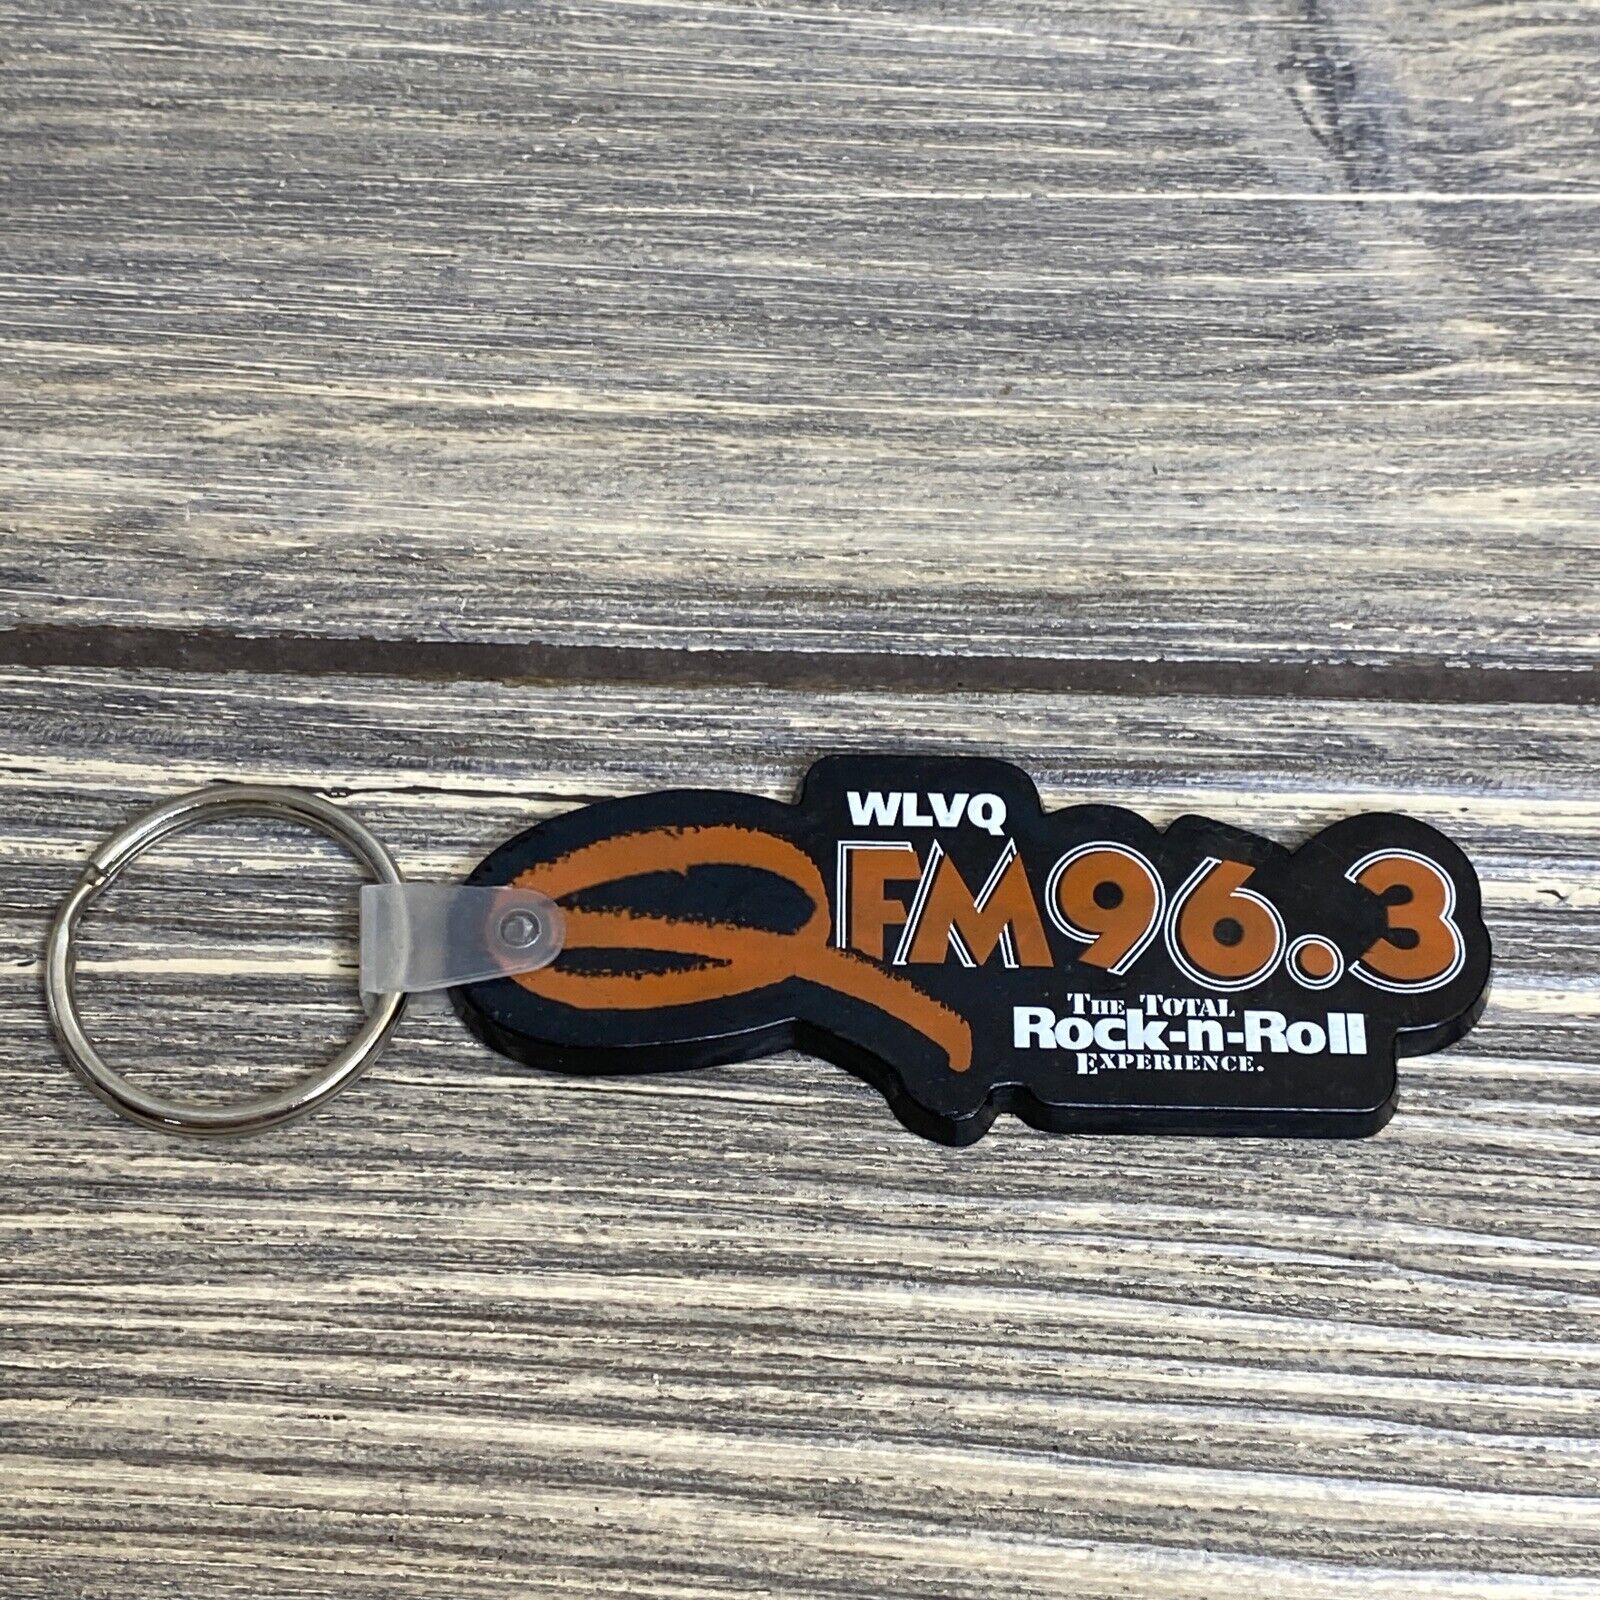 Vintage WLVQ FM 96.3 Rock-n-Roll Experience Black Plastic Key Chain Ring A2